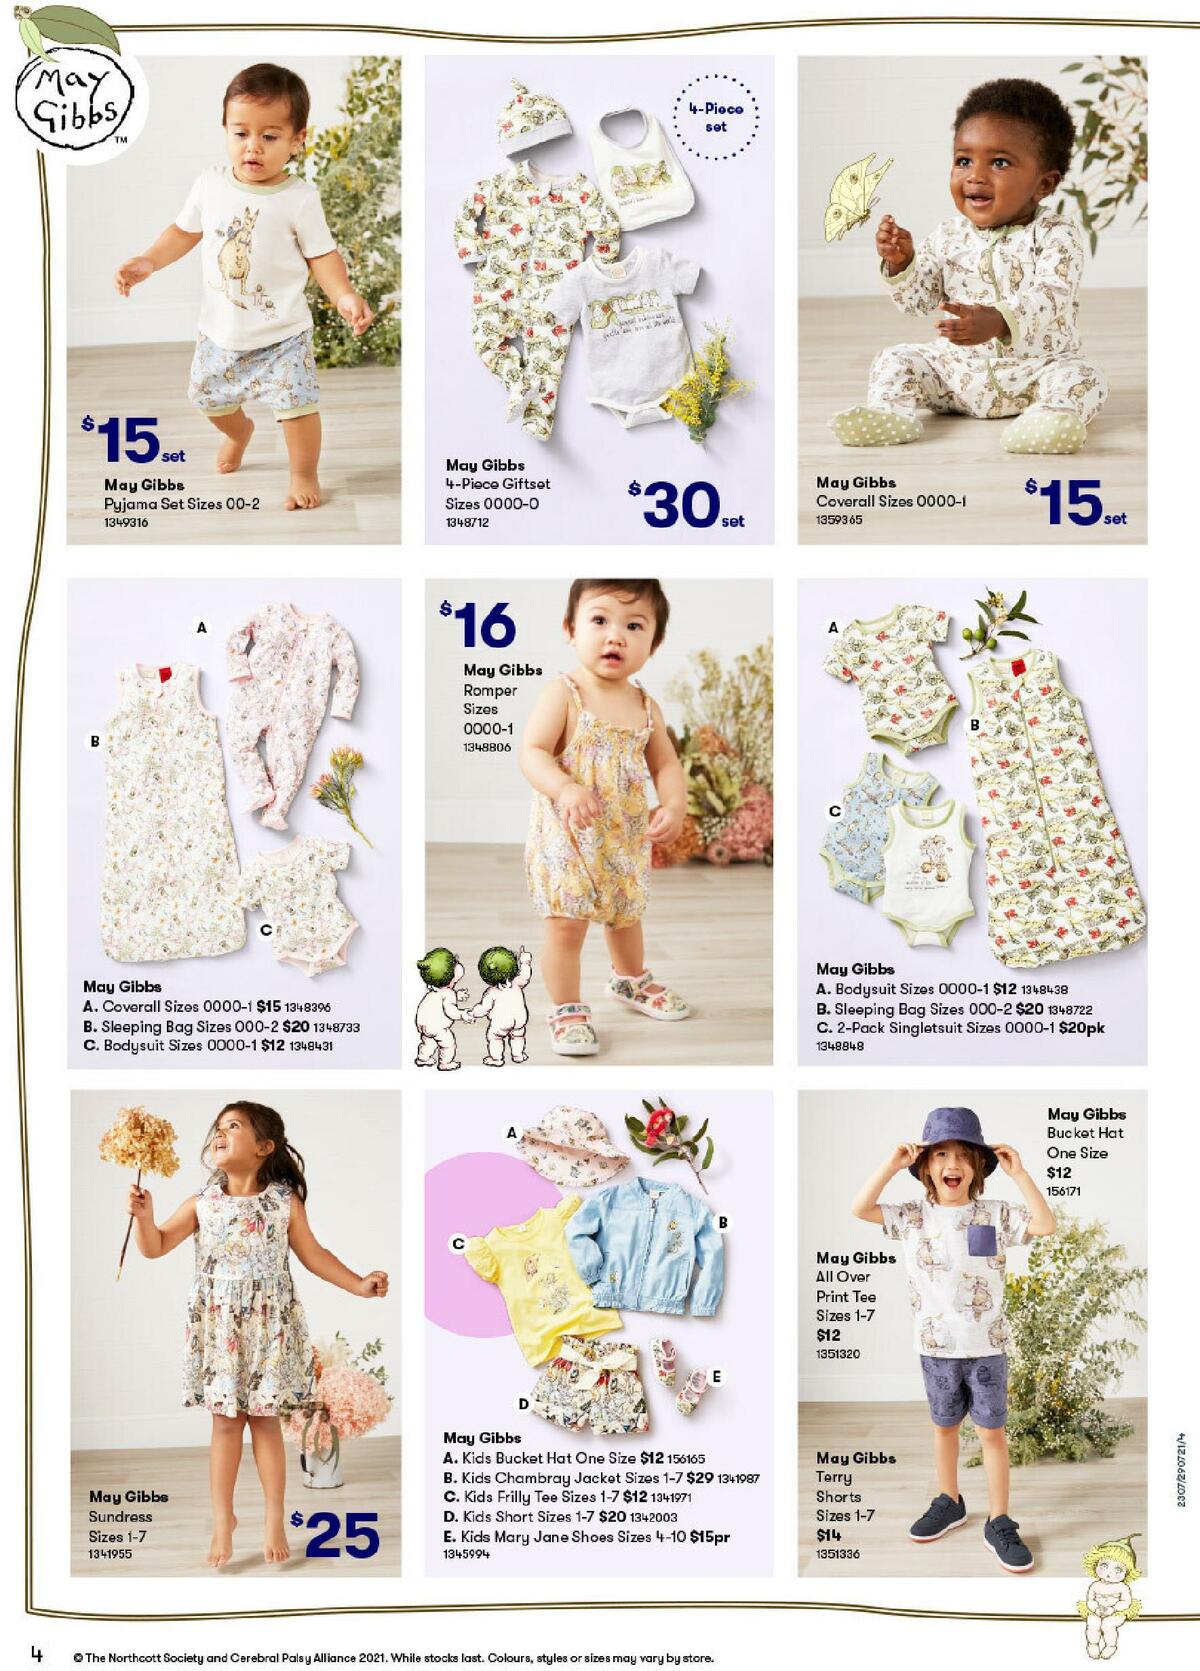 Big W Catalogues from 29 July